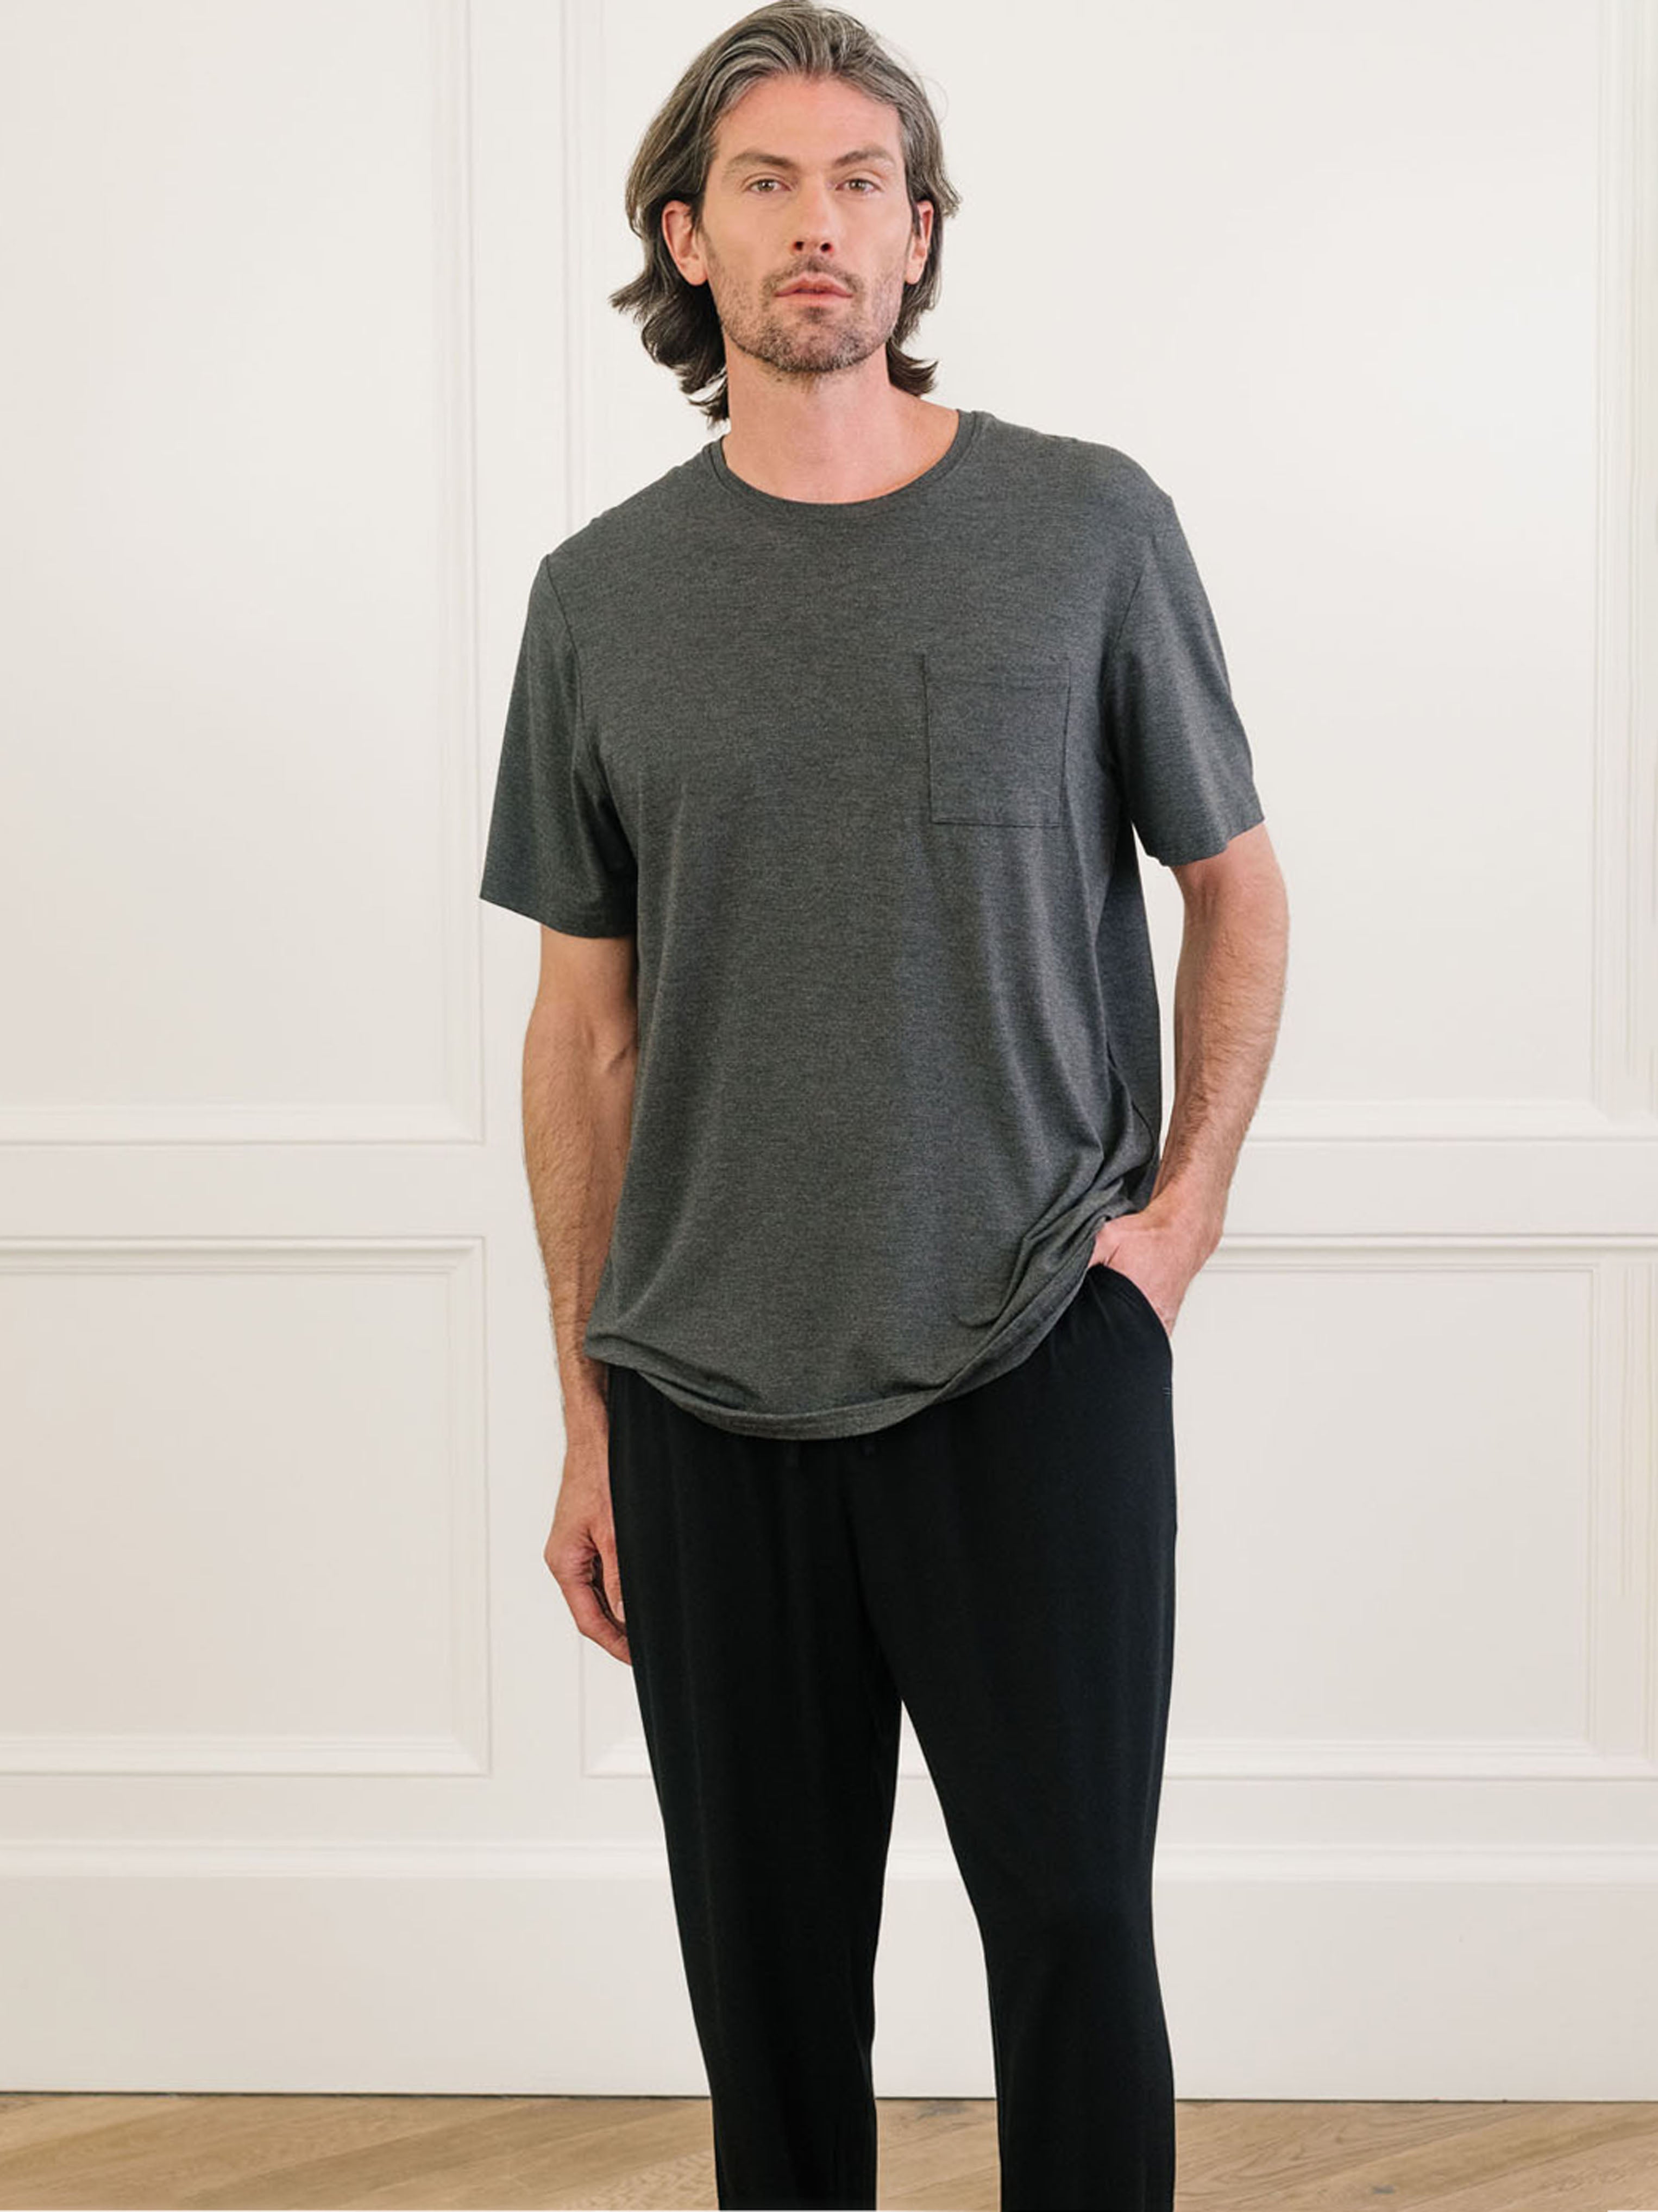 Charcoal Men's Stretch-Knit Bamboo Lounge Tee. A man is wearing the lounge tee in a well lit home.|Color:Charcoal